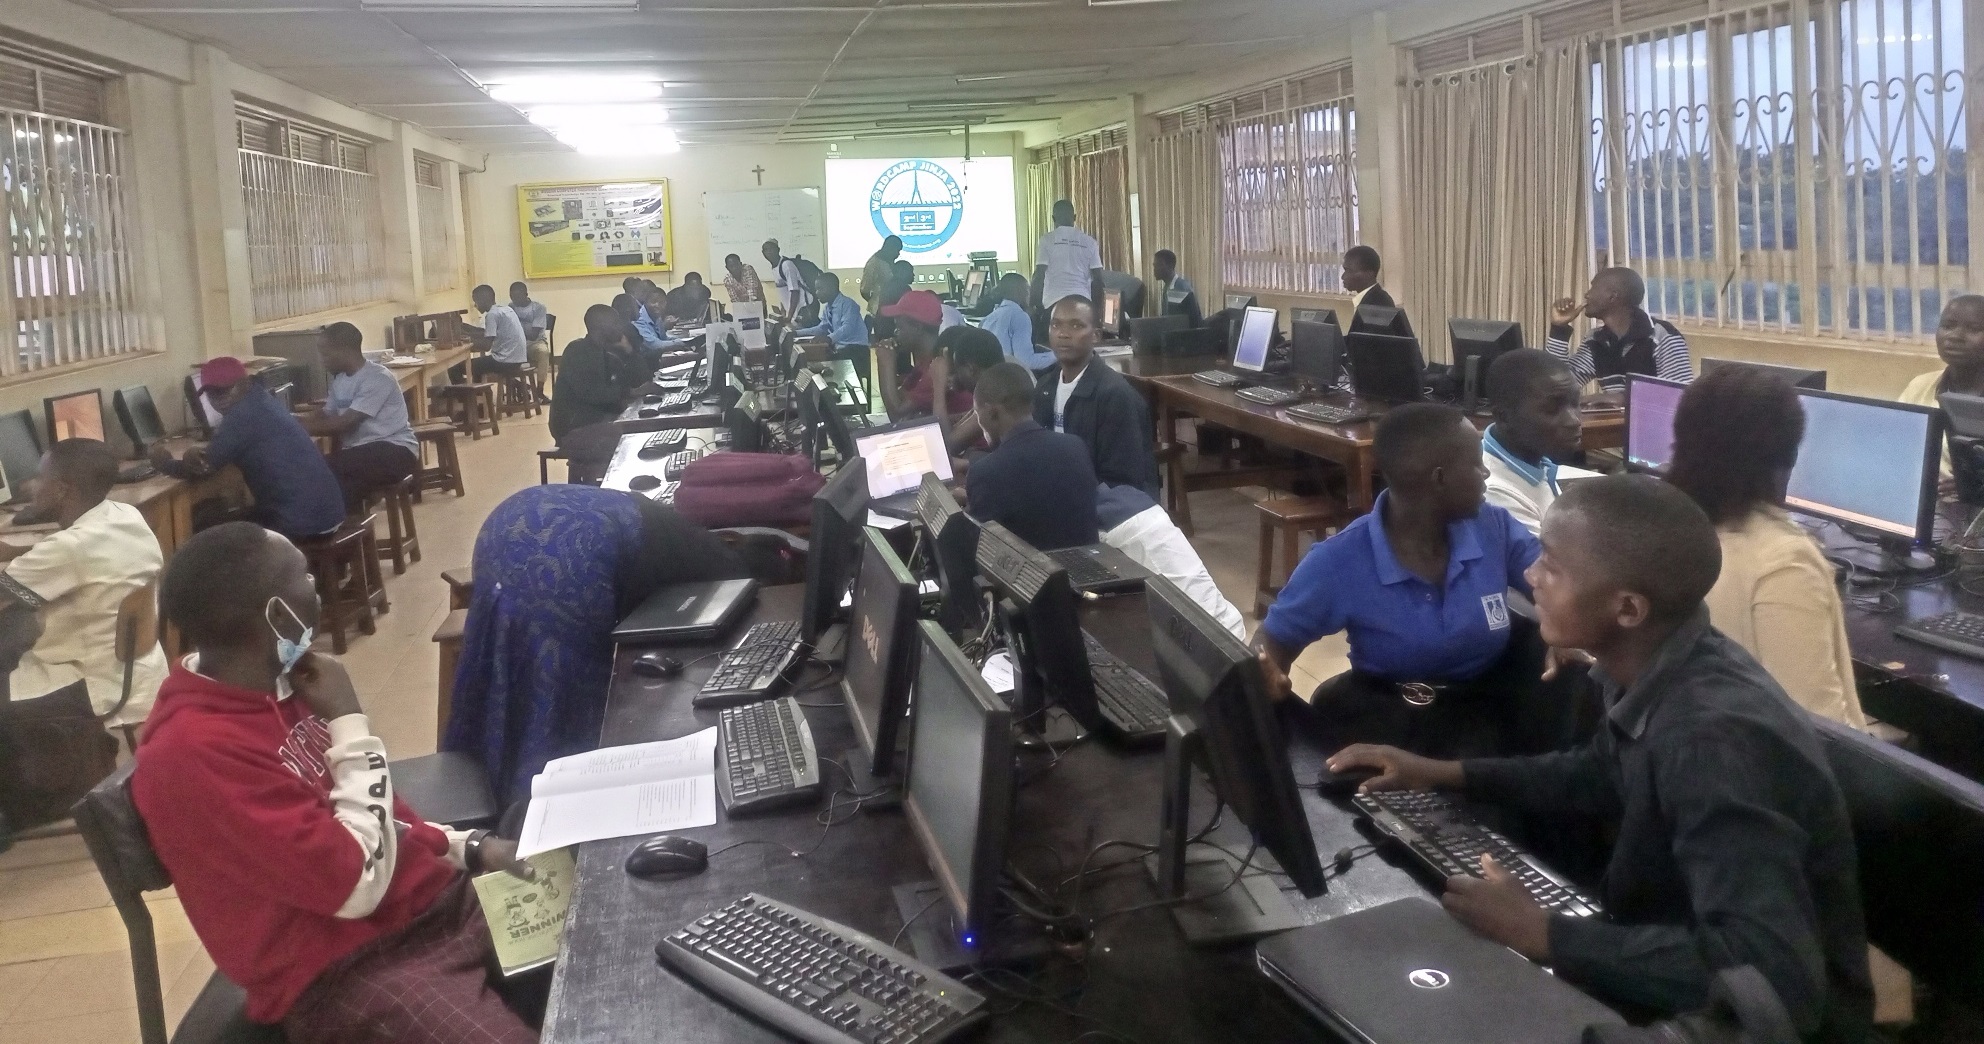 WordCamp Jinja 2022 attendees in the Computer Lab at Jinja College on 2nd Sept 2022